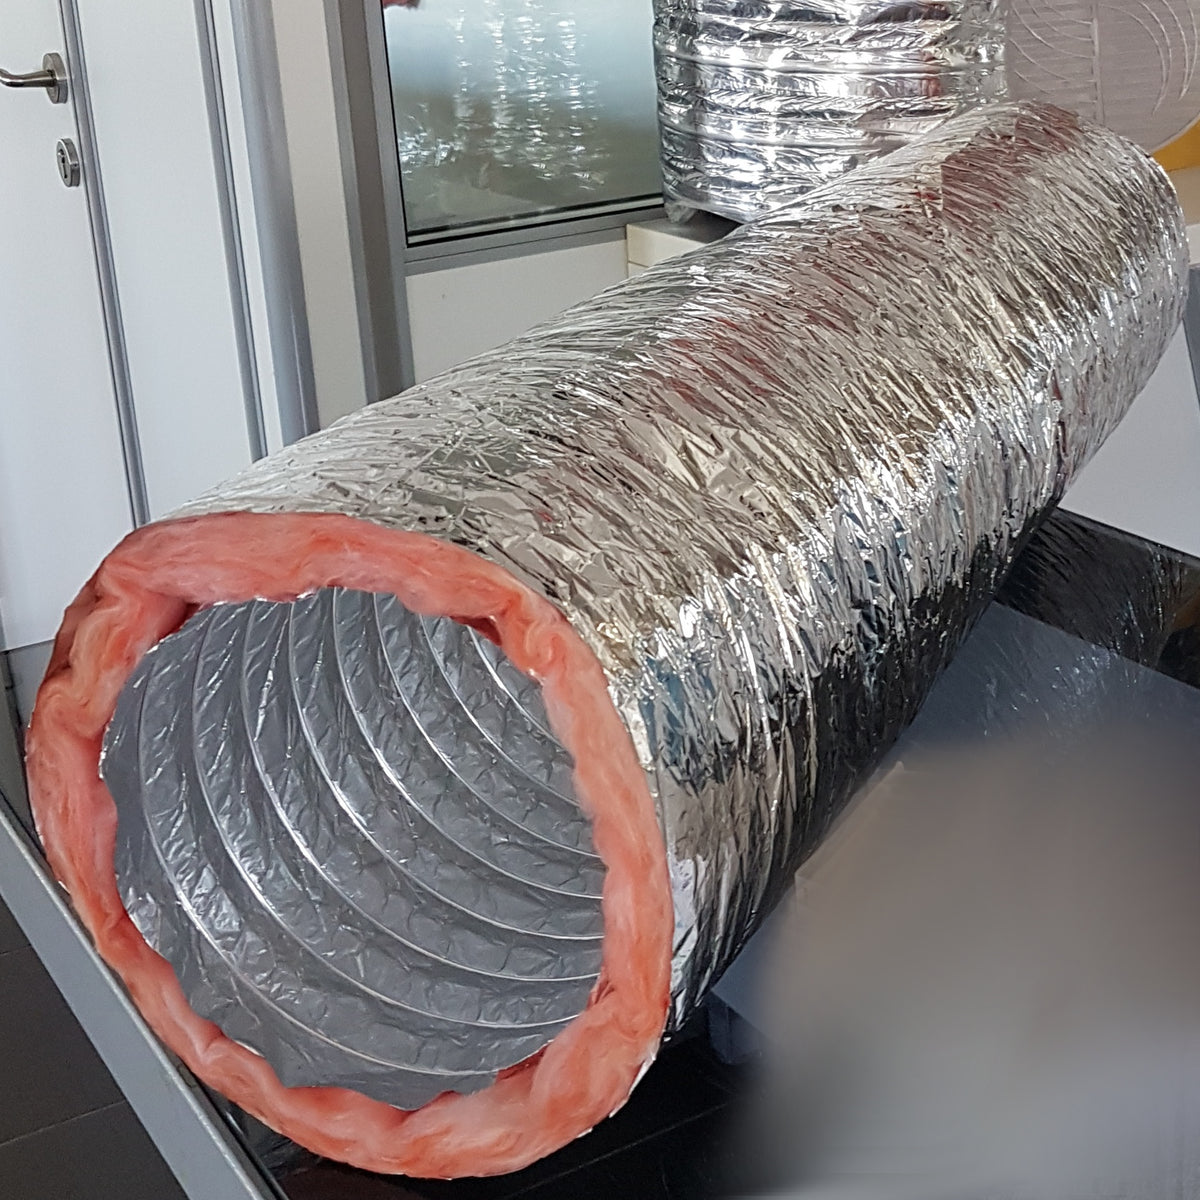 7&quot; Inch Aluminum Hose Flexible Insulated R-8.0 Air Duct Pipe for Rigid HVAC Flex Ductwork Insulation - 25&#39; Feet Long